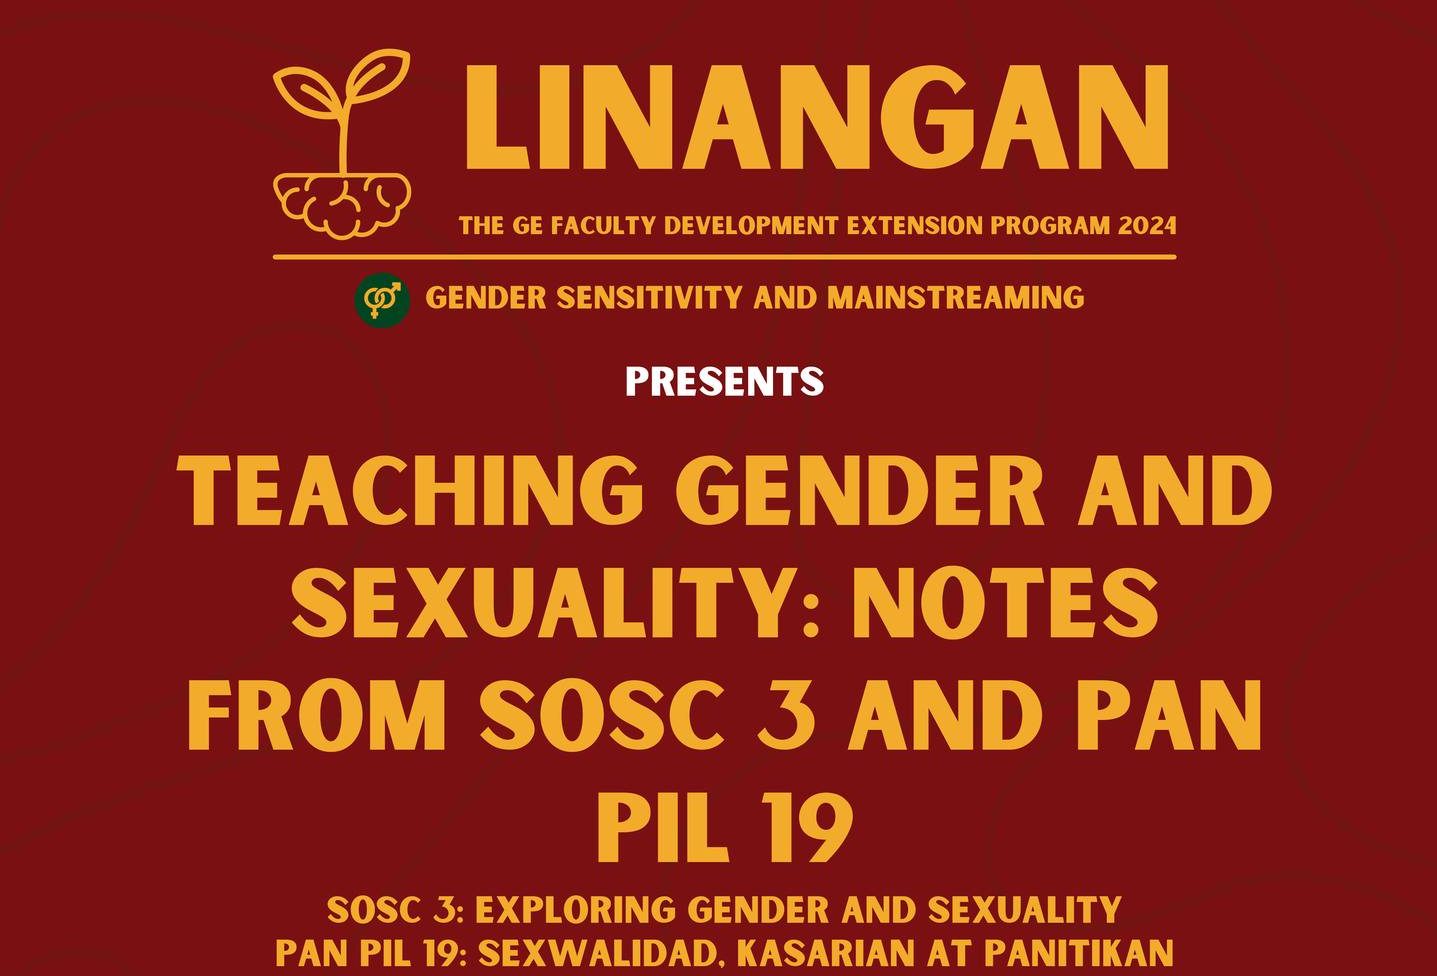 LINANGAN: Teaching Gender and Sexuality: Notes from SOSC 3 and Pan Pil 19